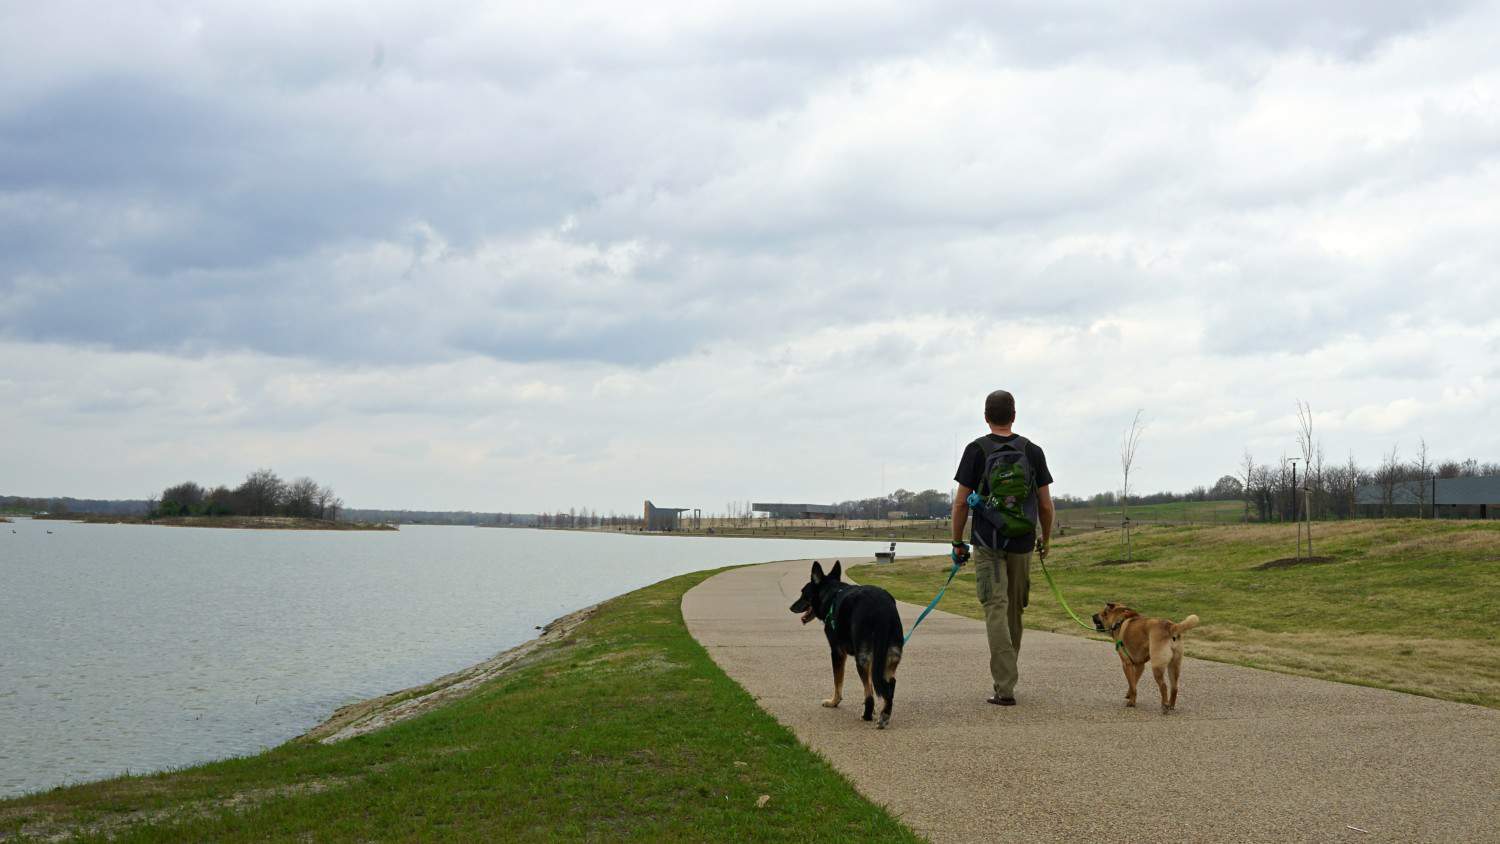 Tennessee's Top Pet Friendly Attraction: Shelby Farms Park | GoPetFriendly.com